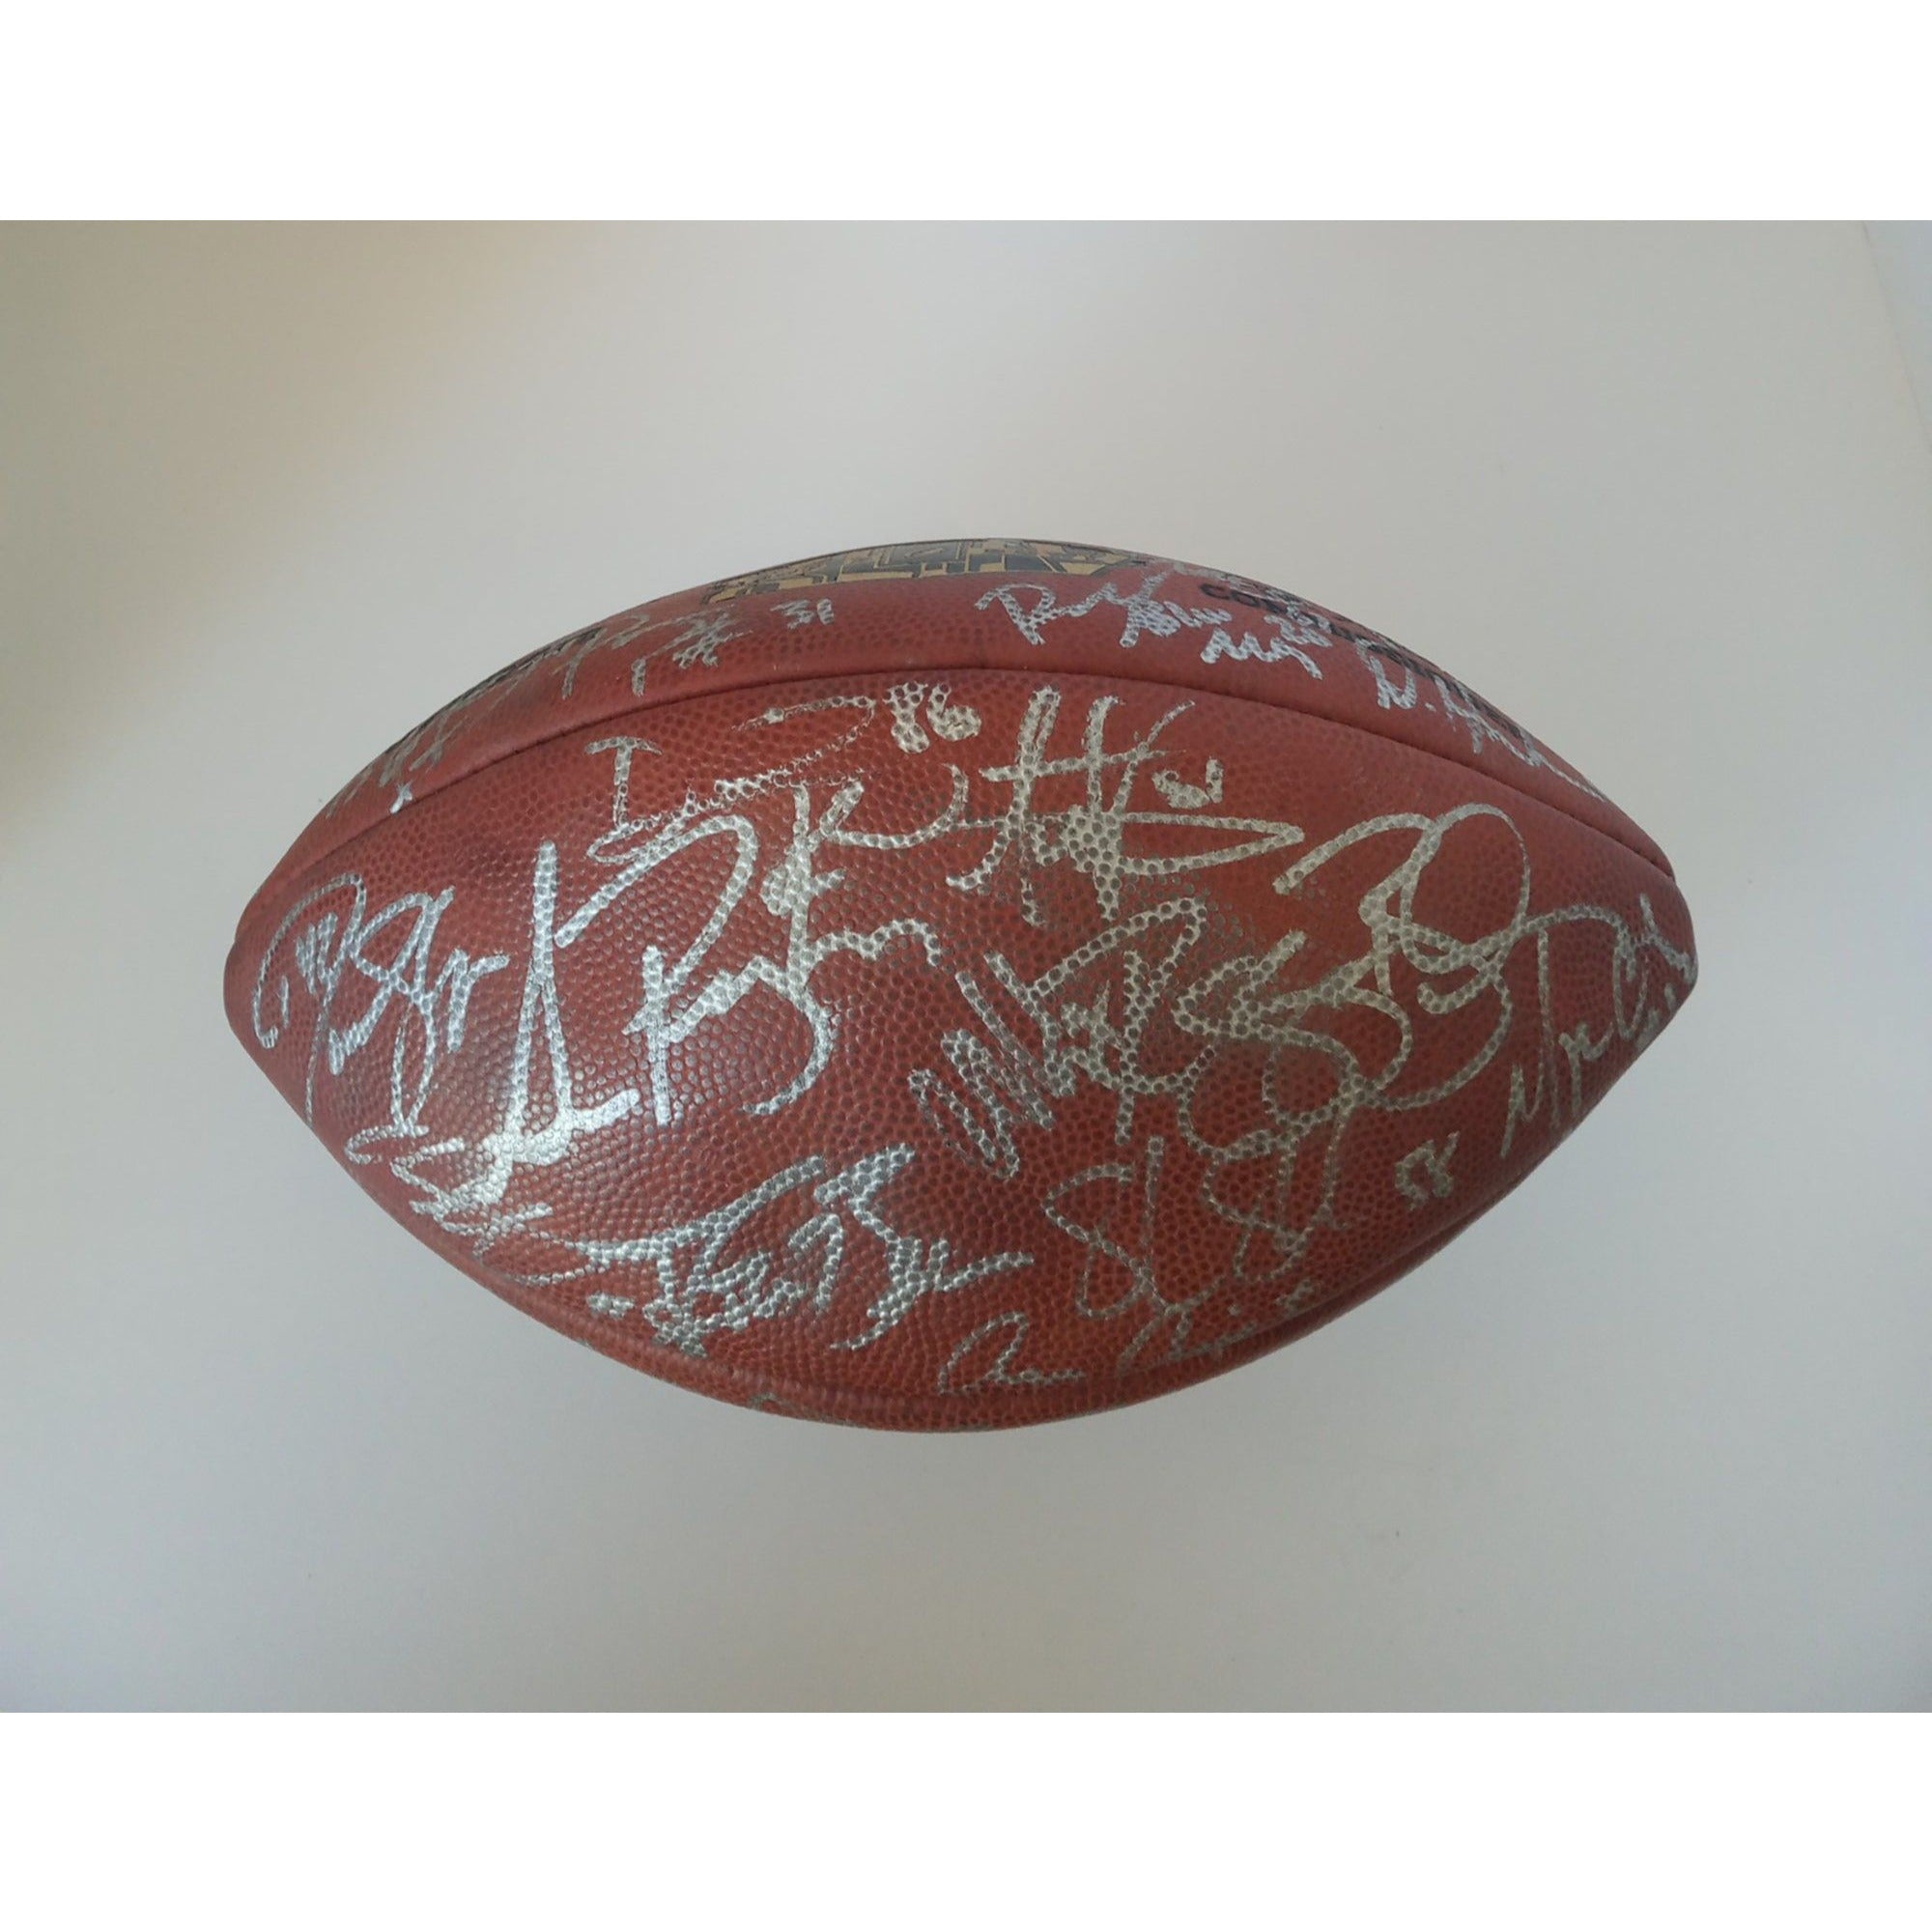 Drew Brees New Orleans Saints Super Bowl team signed football with proof